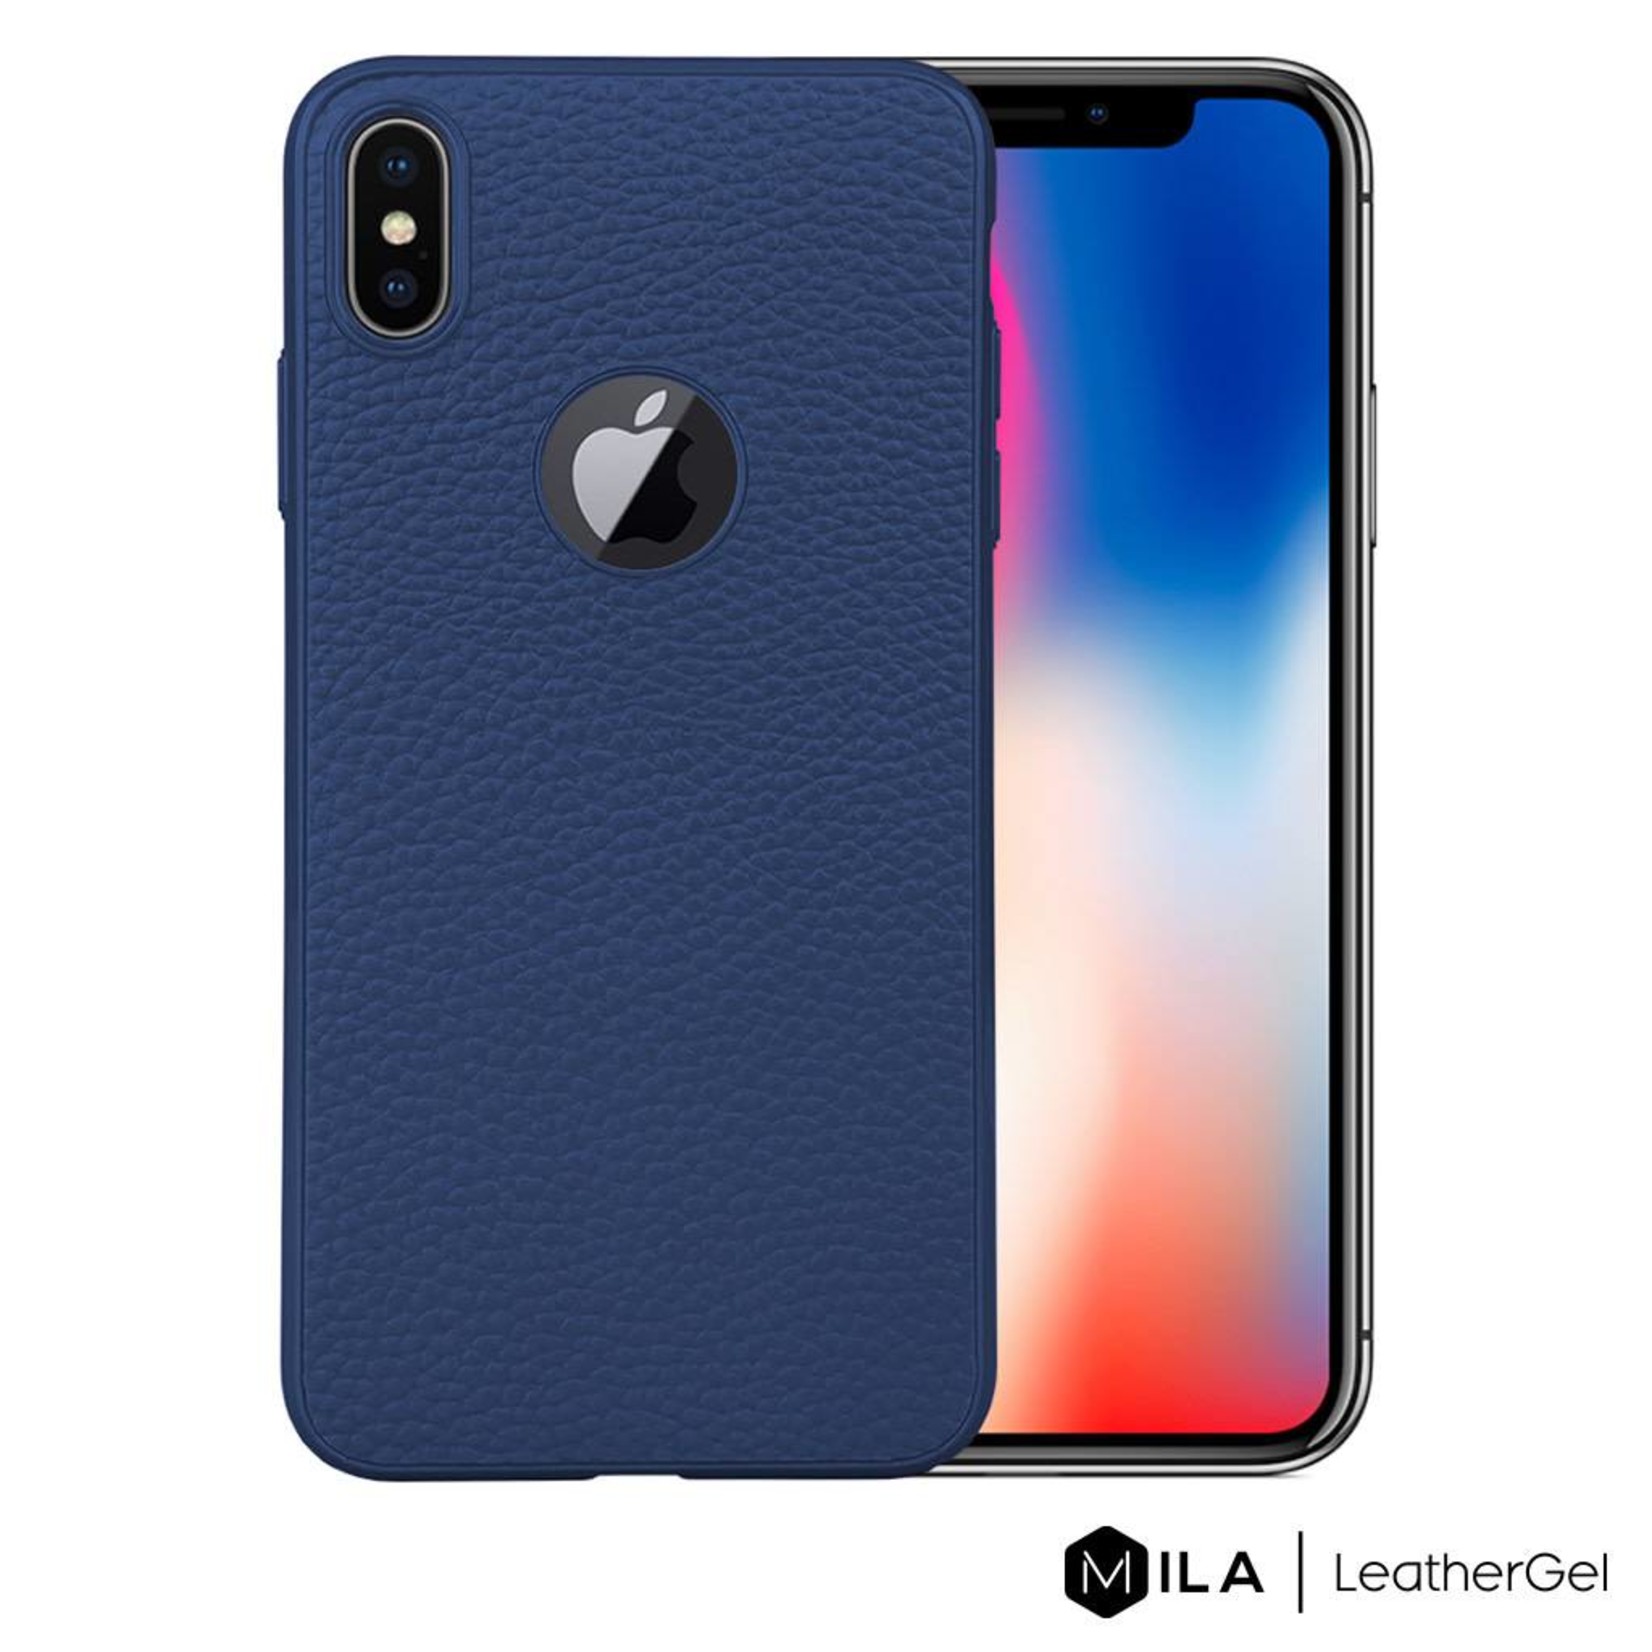 MILA | LeatherGel Case for iPhone XS Max